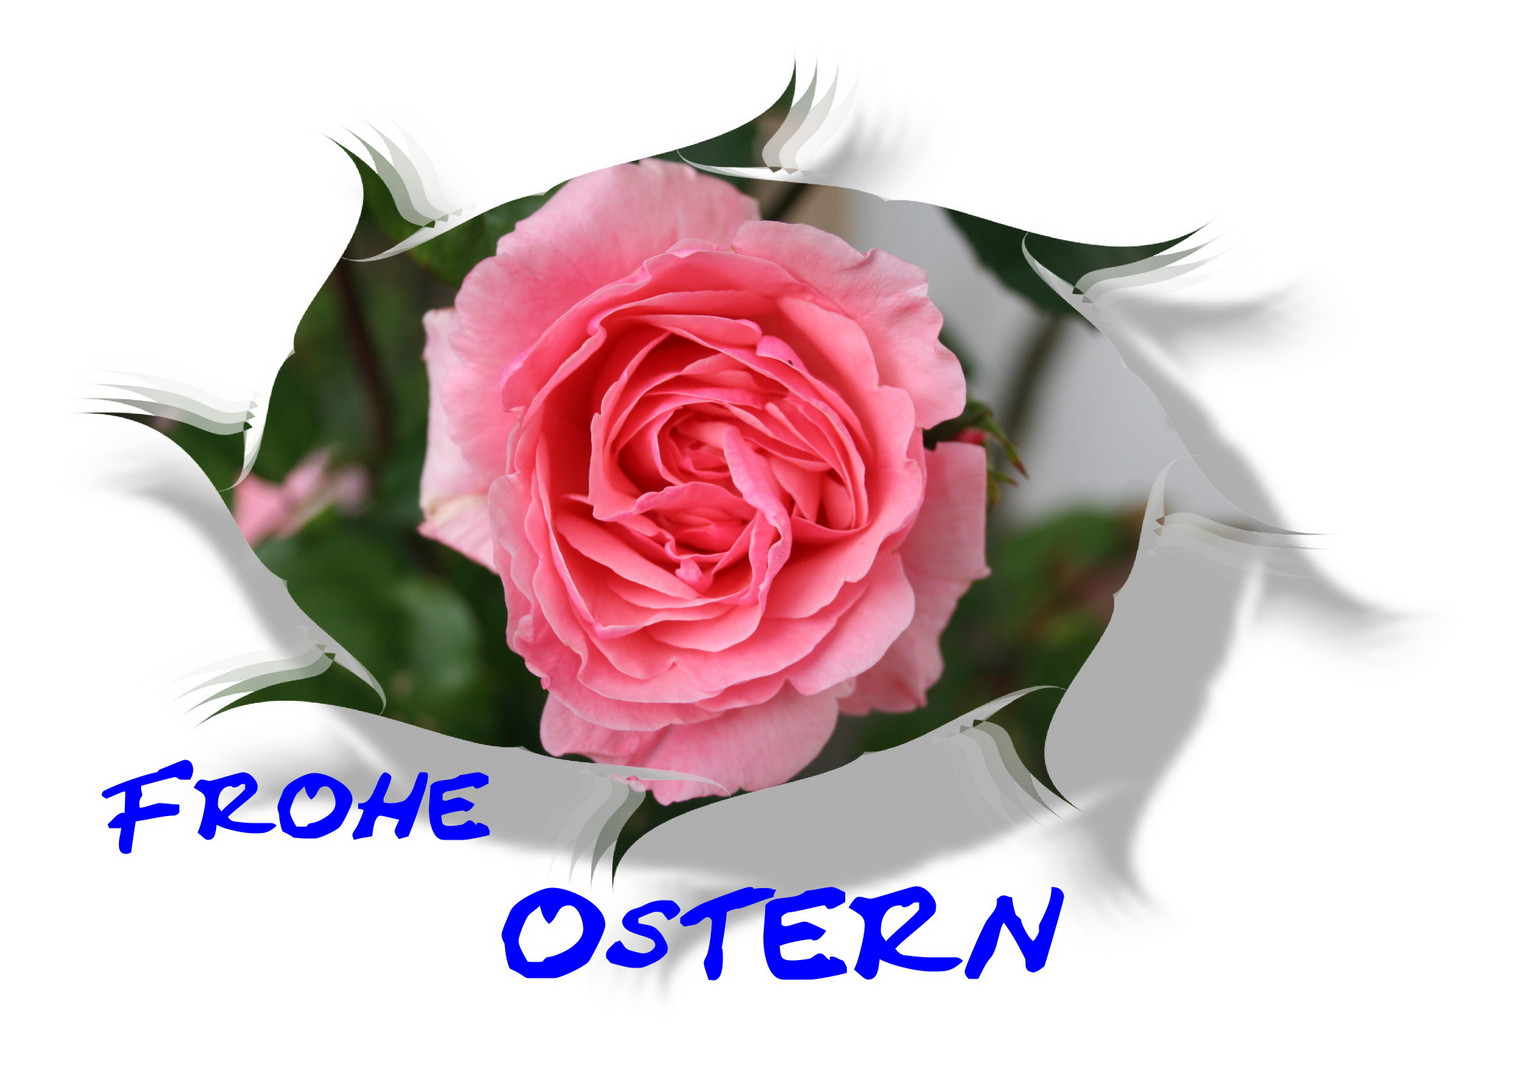 Frohe Ostern 2011